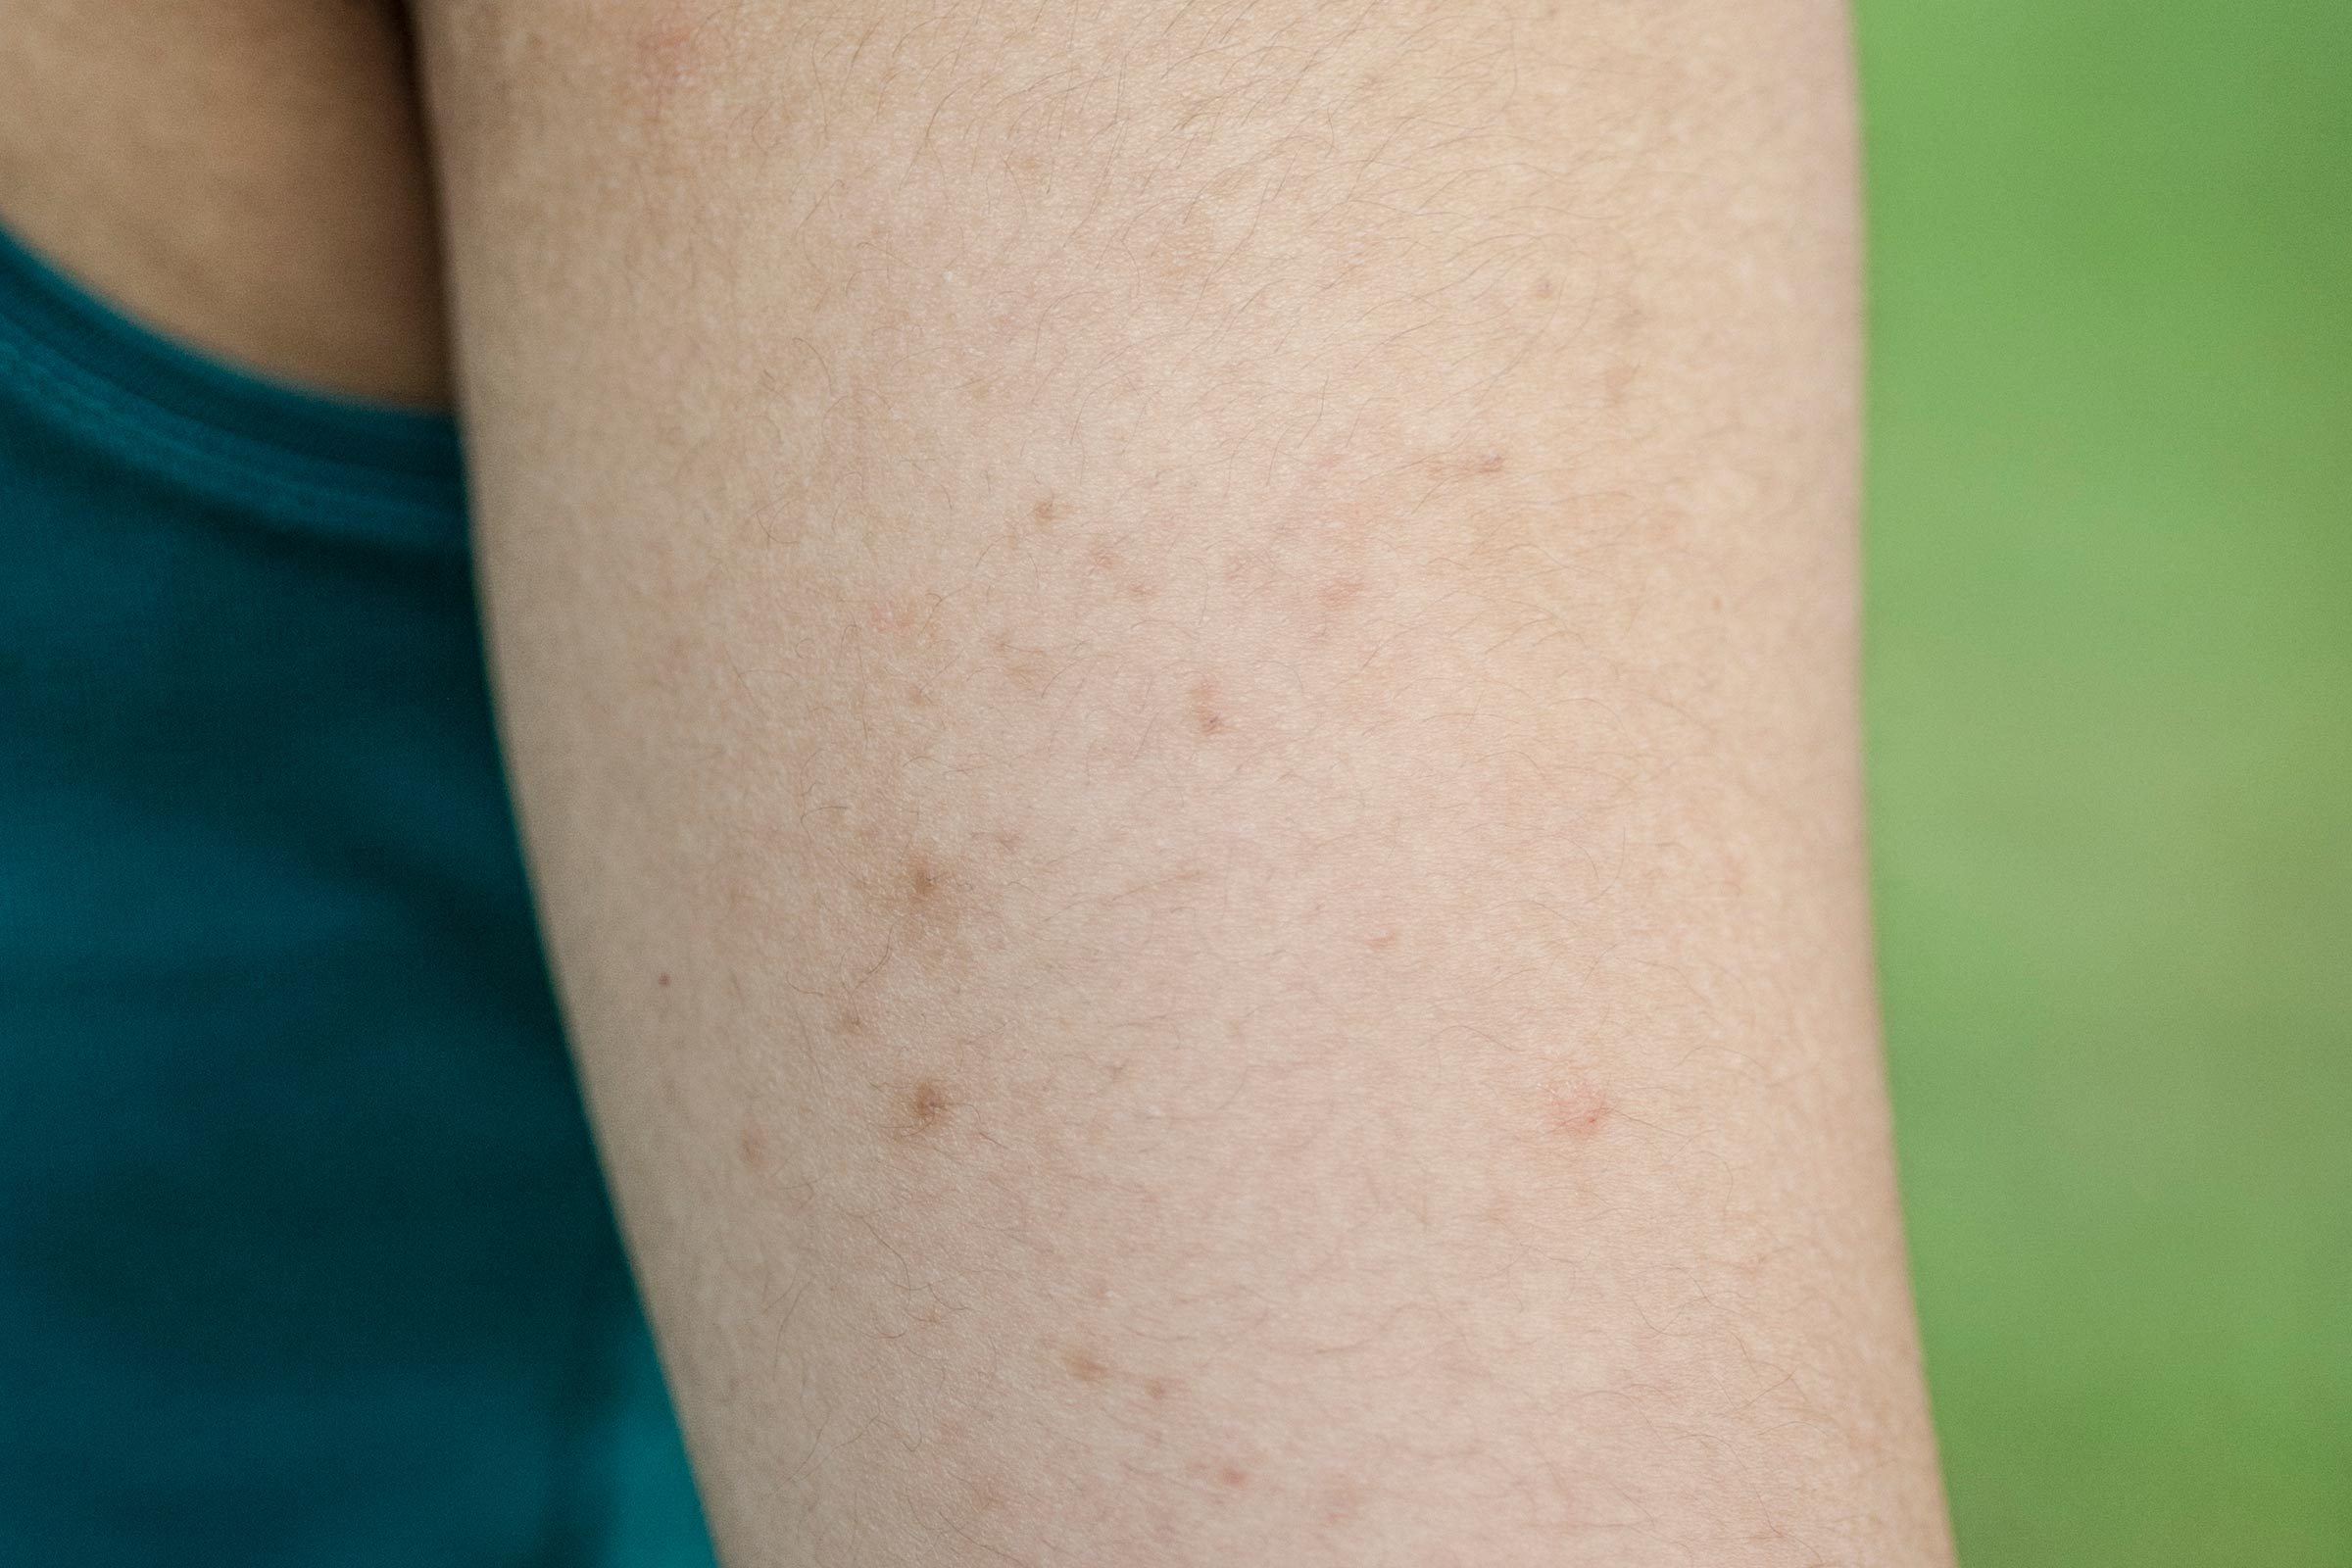 What causes small pimples on the arms?